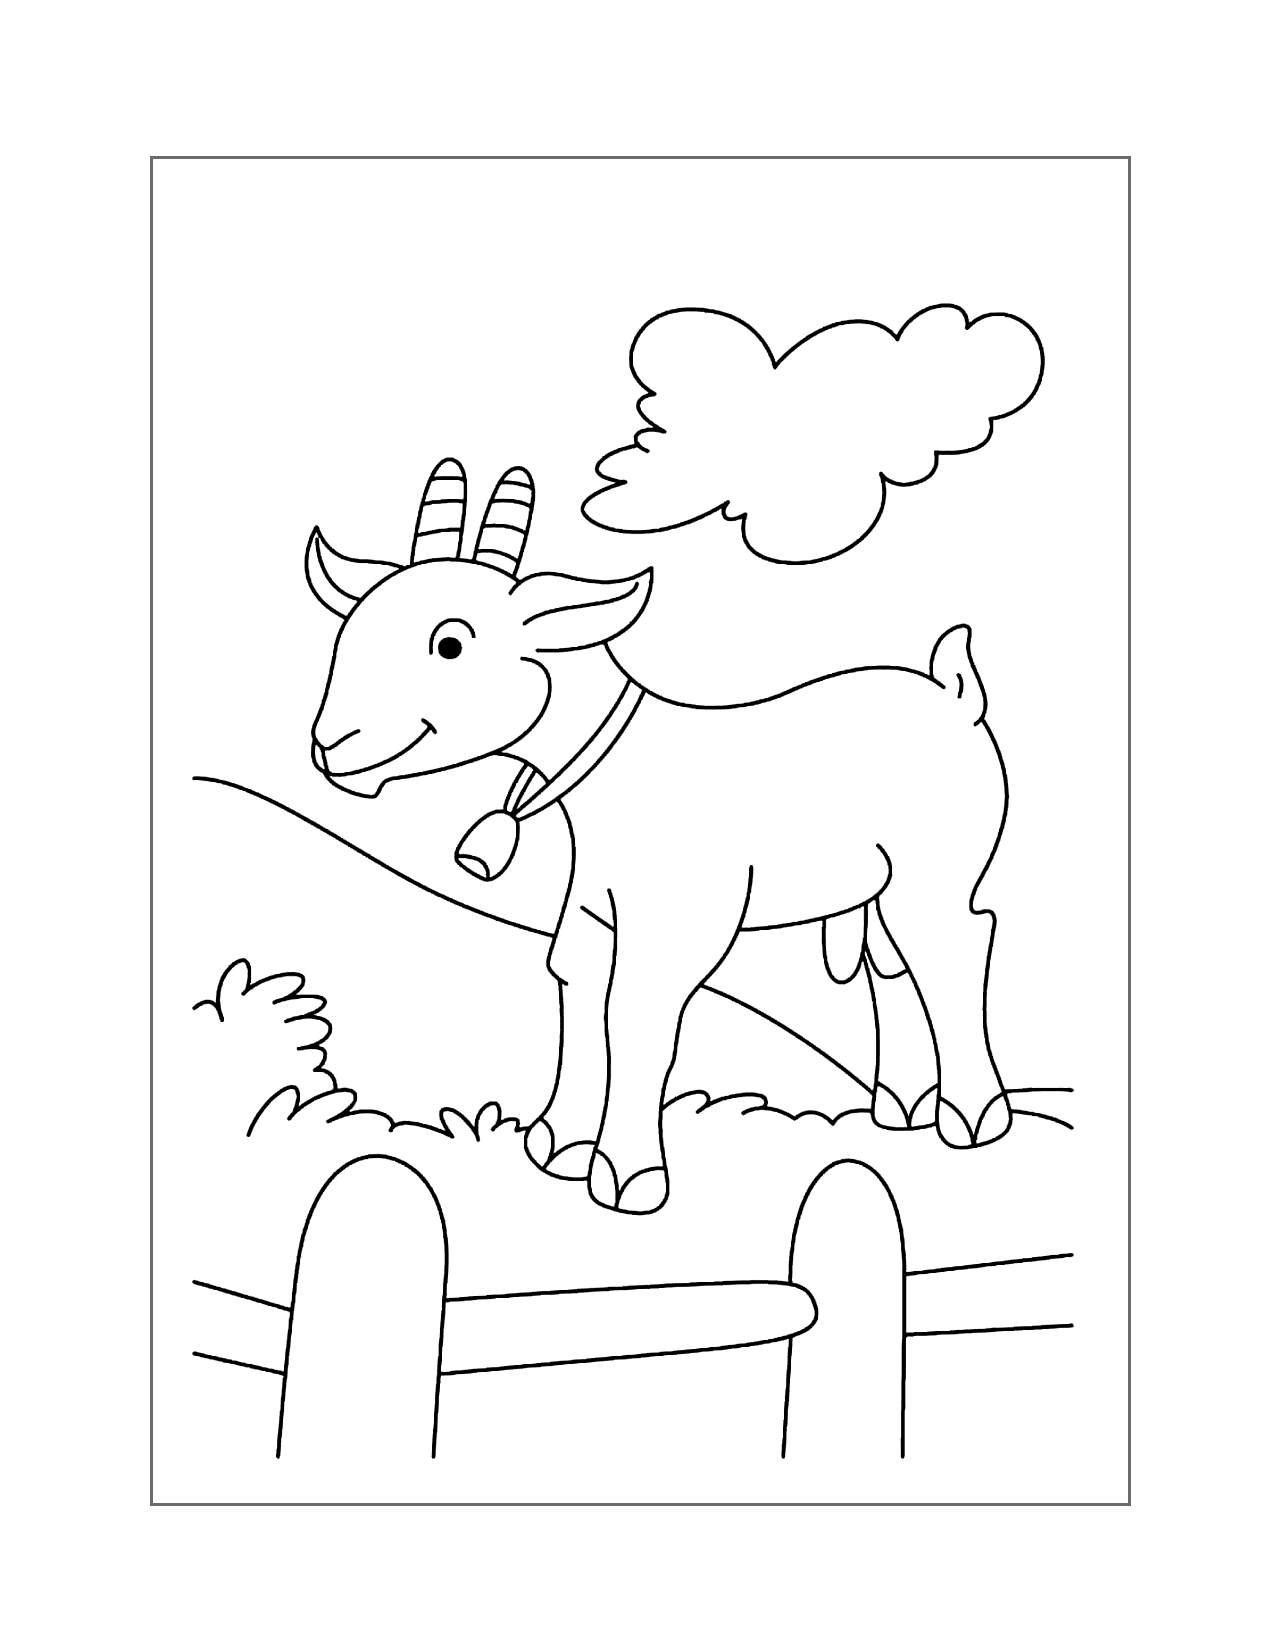 Goat Behind Fence Coloring Page